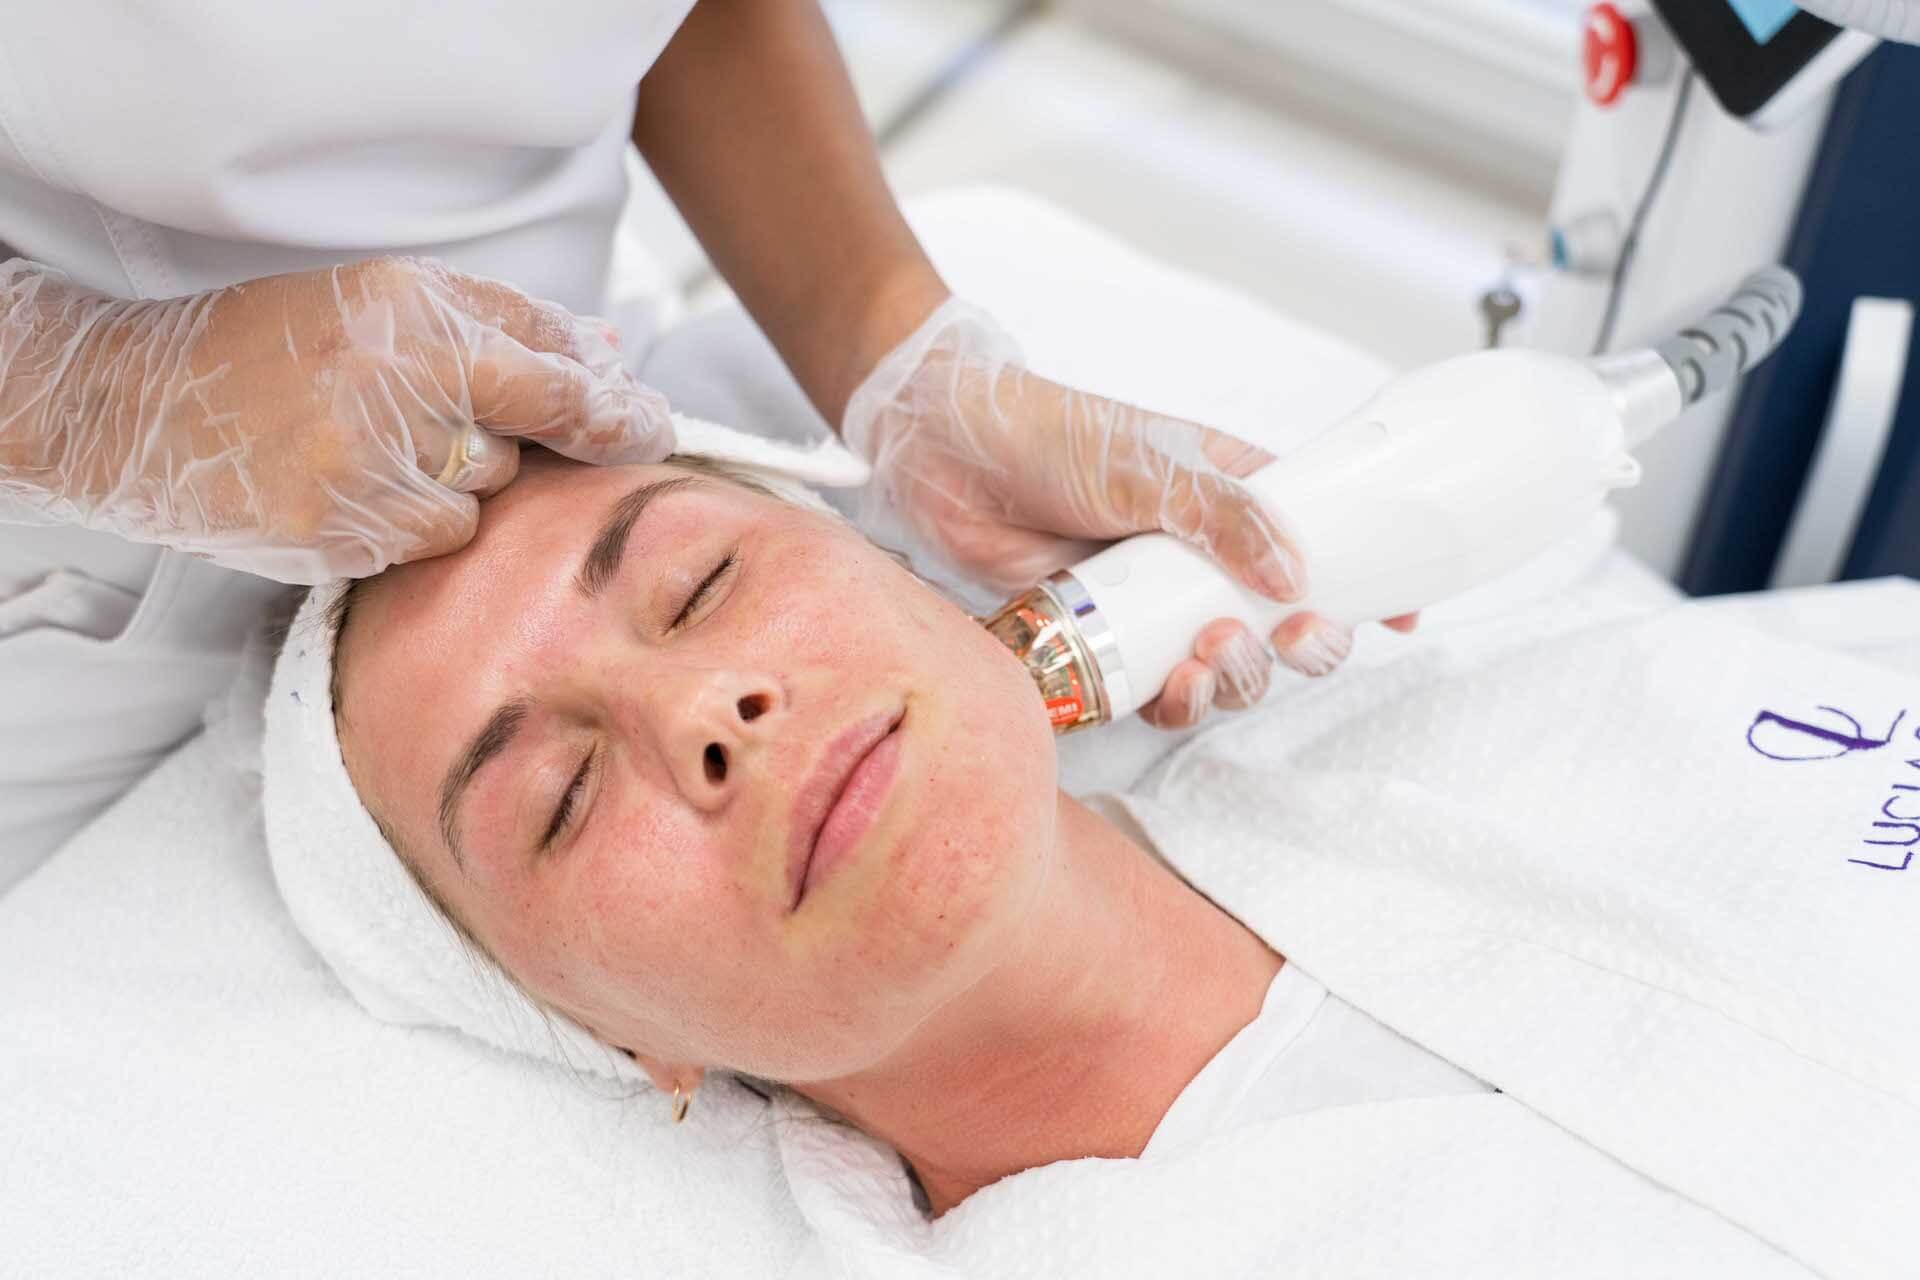 Secret Fractional RF micro-needling, anti-aging treatments - lift, rejuvenate and firm your skin with advanced and minimally invasive micro-needling treatment.